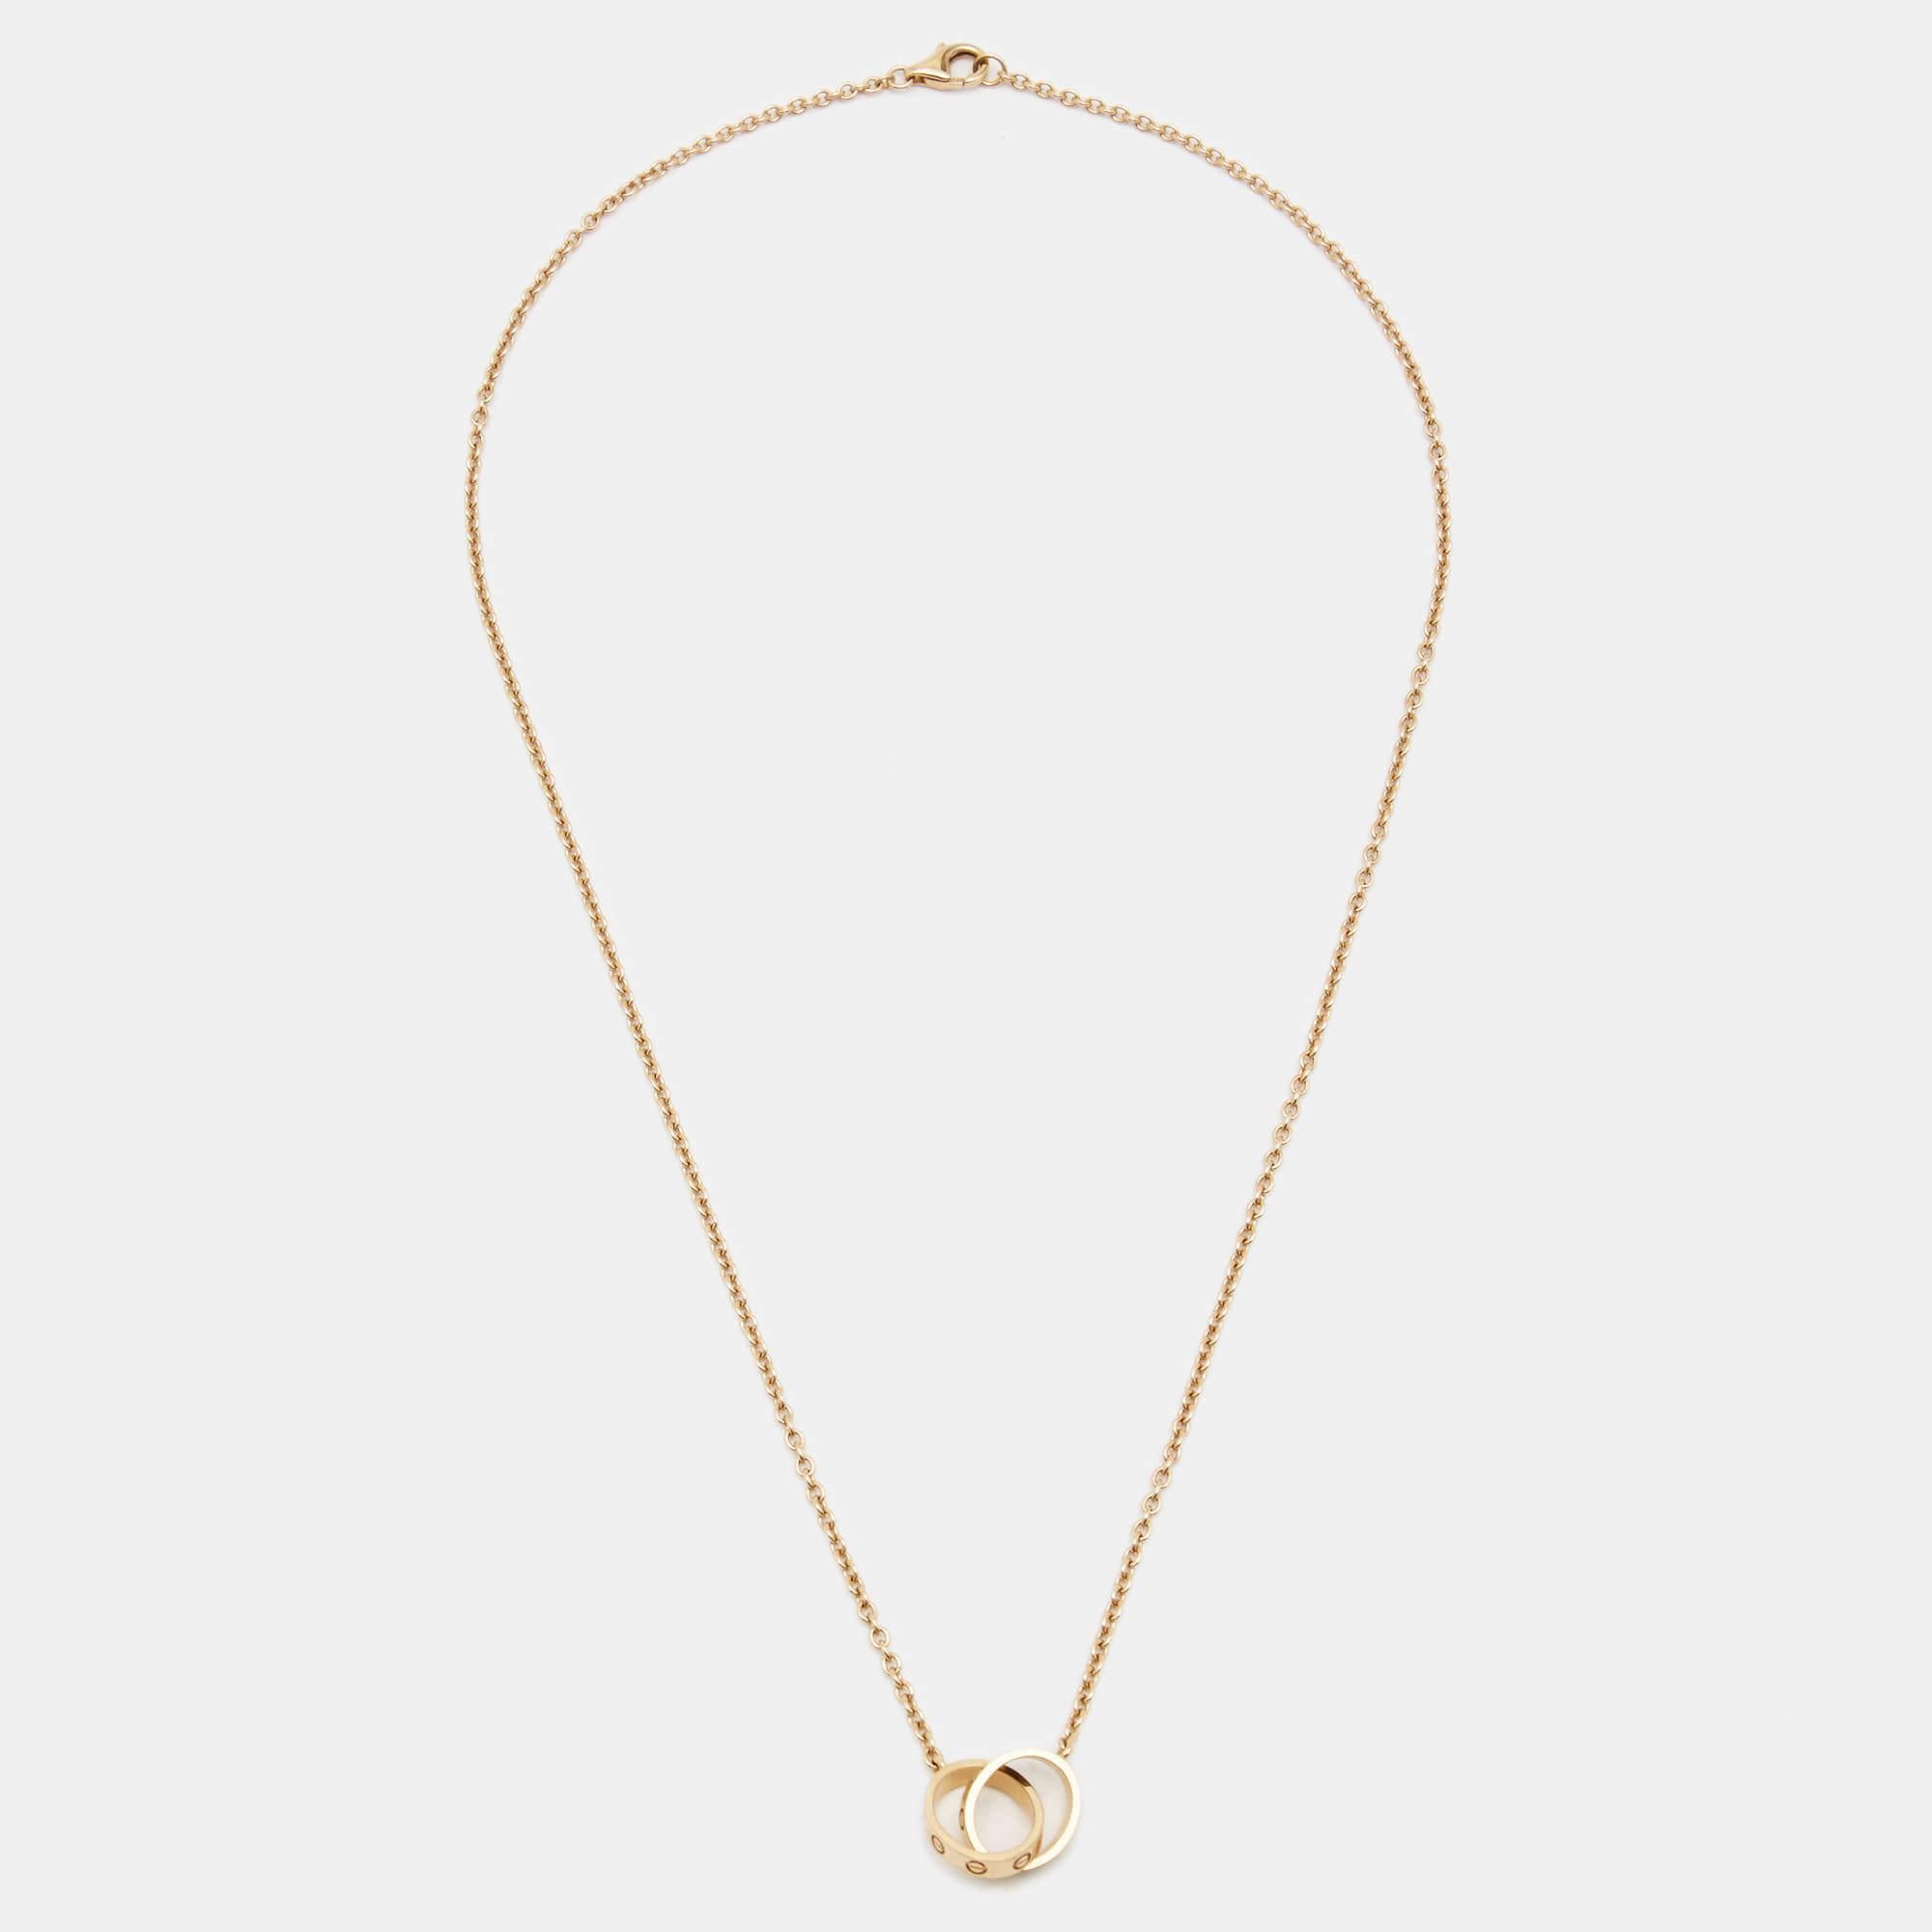 Celebrate timeless love with this necklace from Cartier's Love collection. It is made from 18k rose gold, and the chain holds two magnificent hoops interlocked with one another. Both the rings carry the iconic screw motifs, which are a signature of